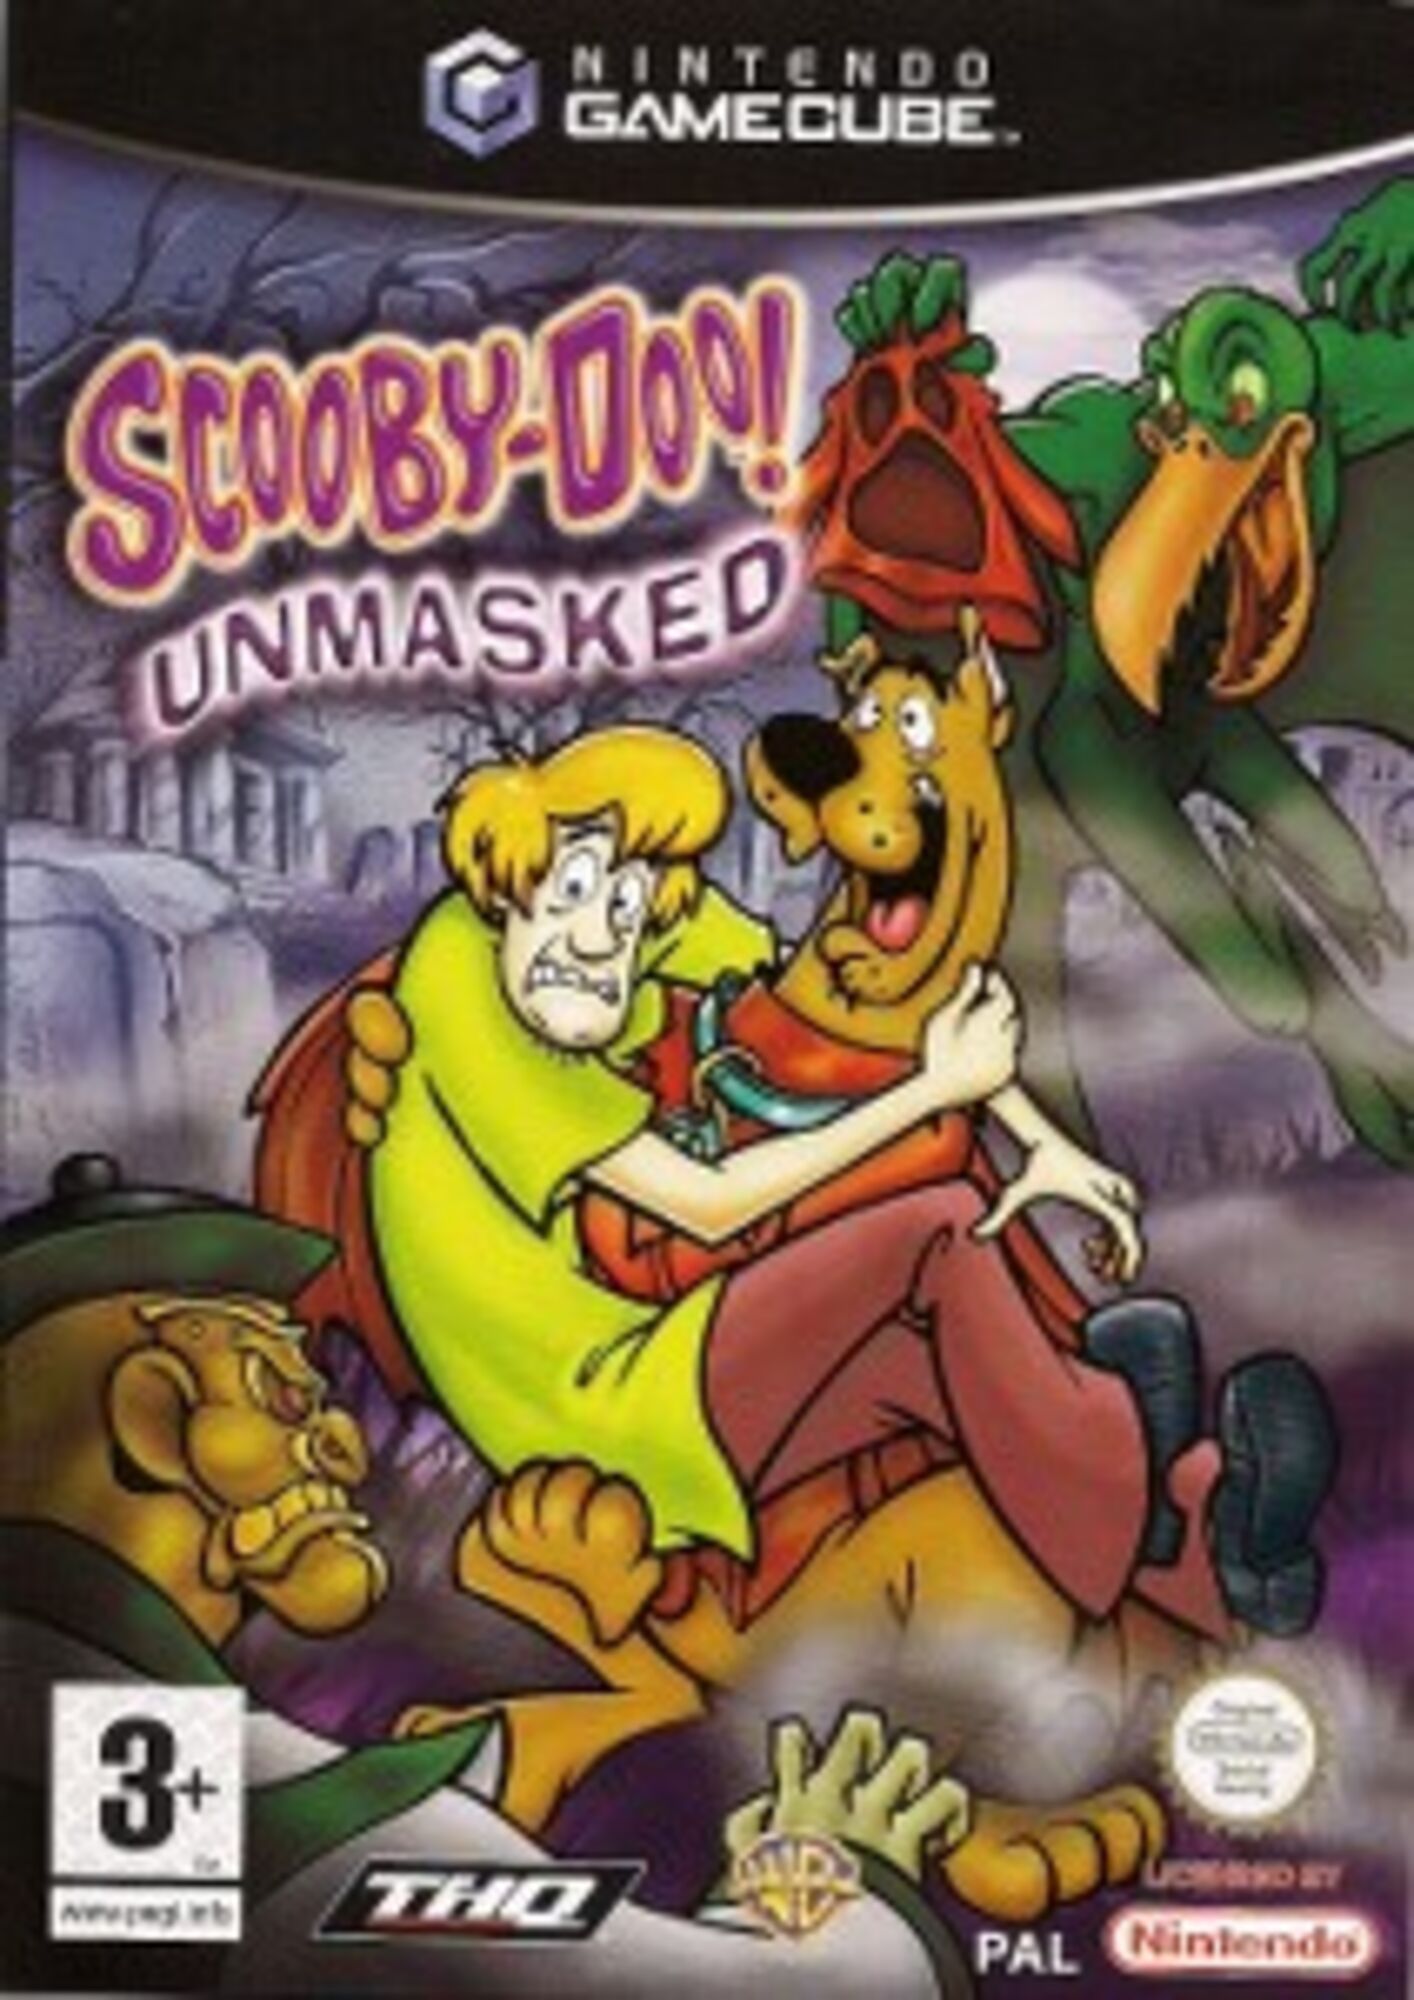 download Scooby-Doo! Unmasked